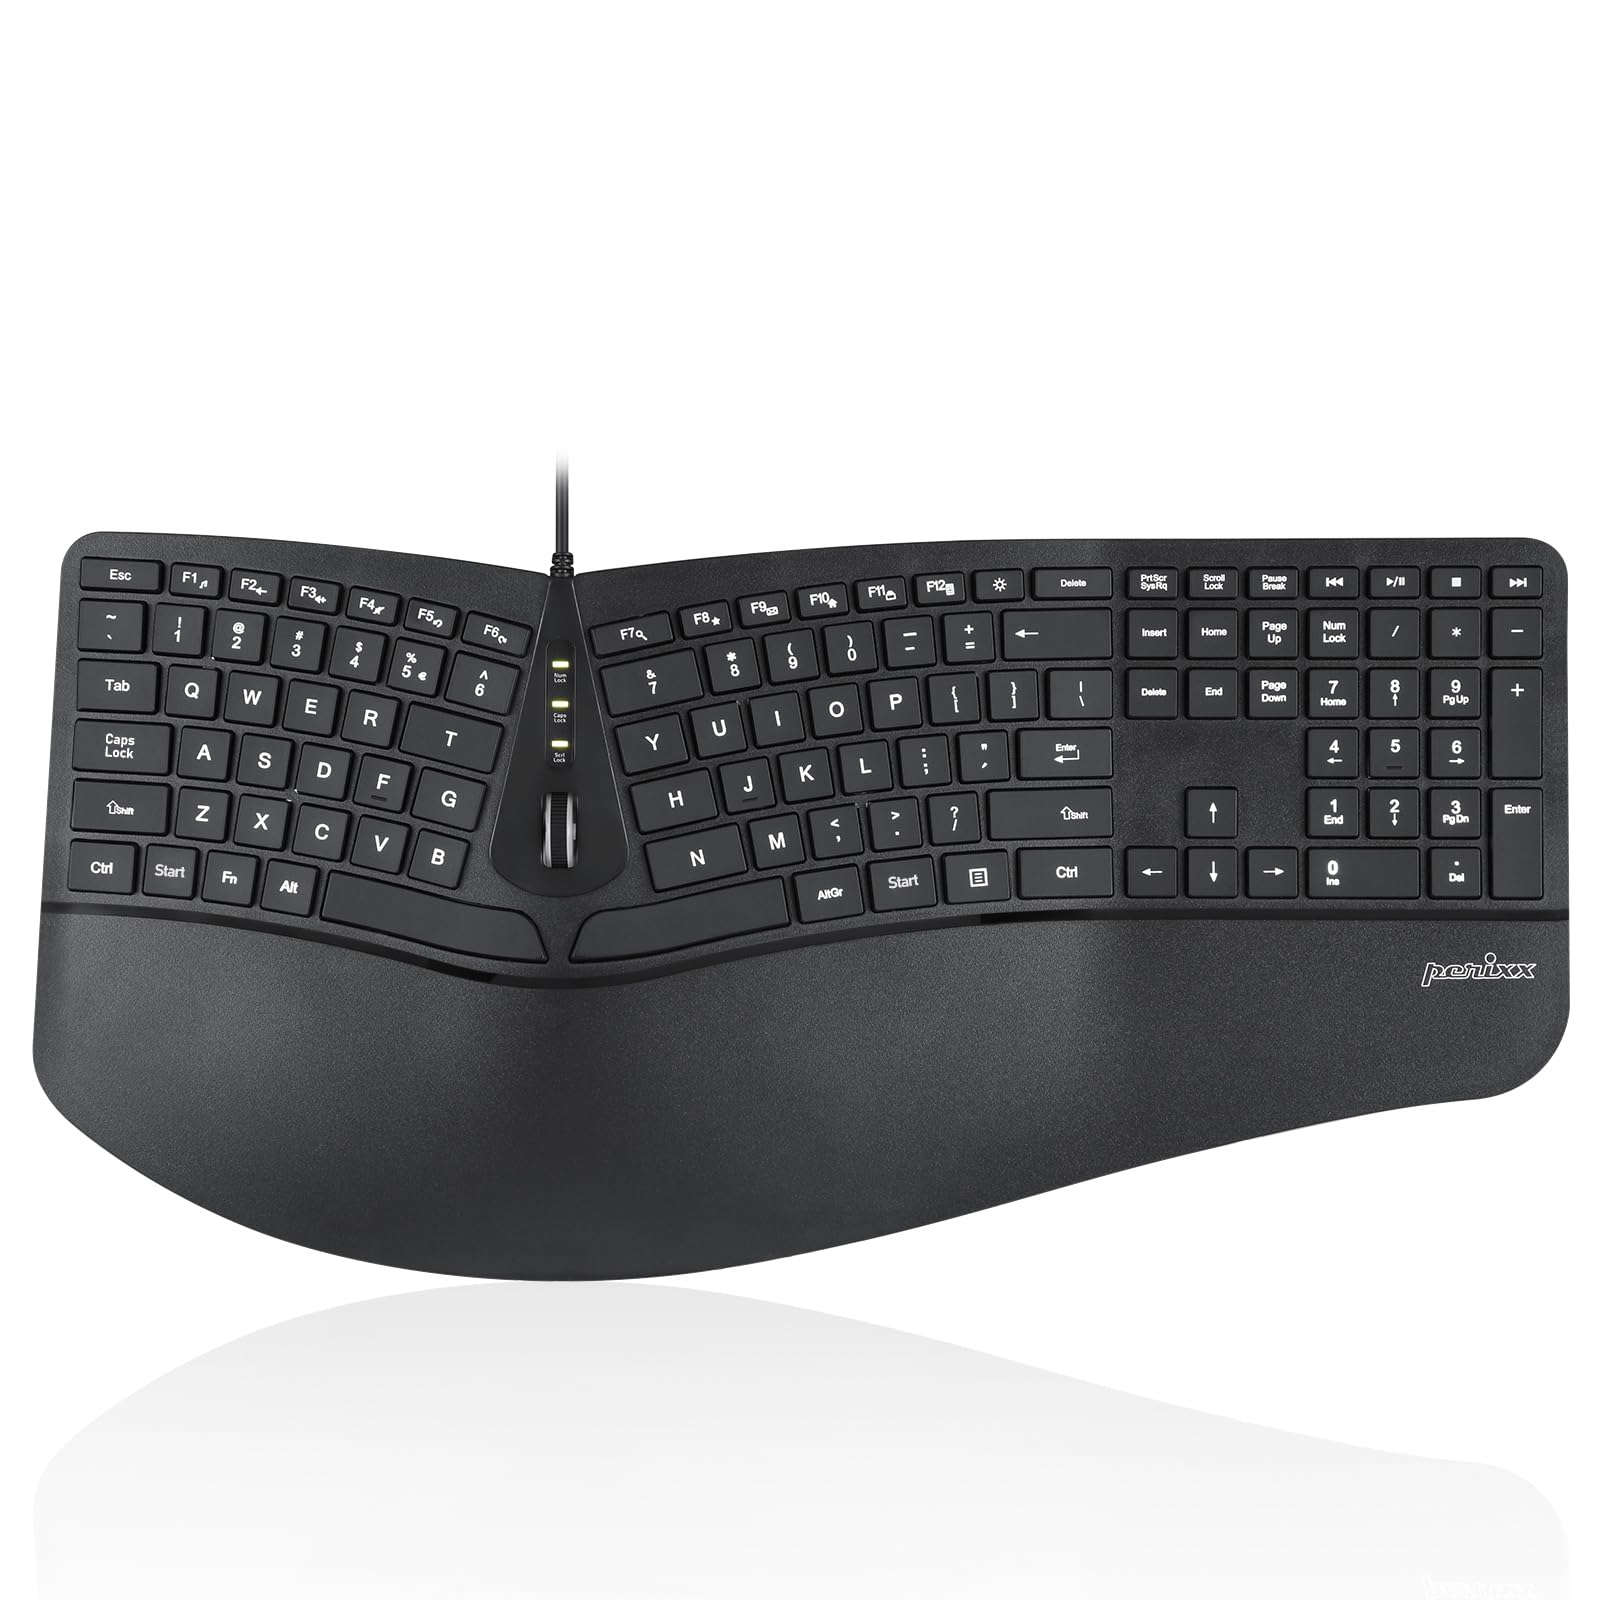 Backlit keyboard with adjustable height and wrist support